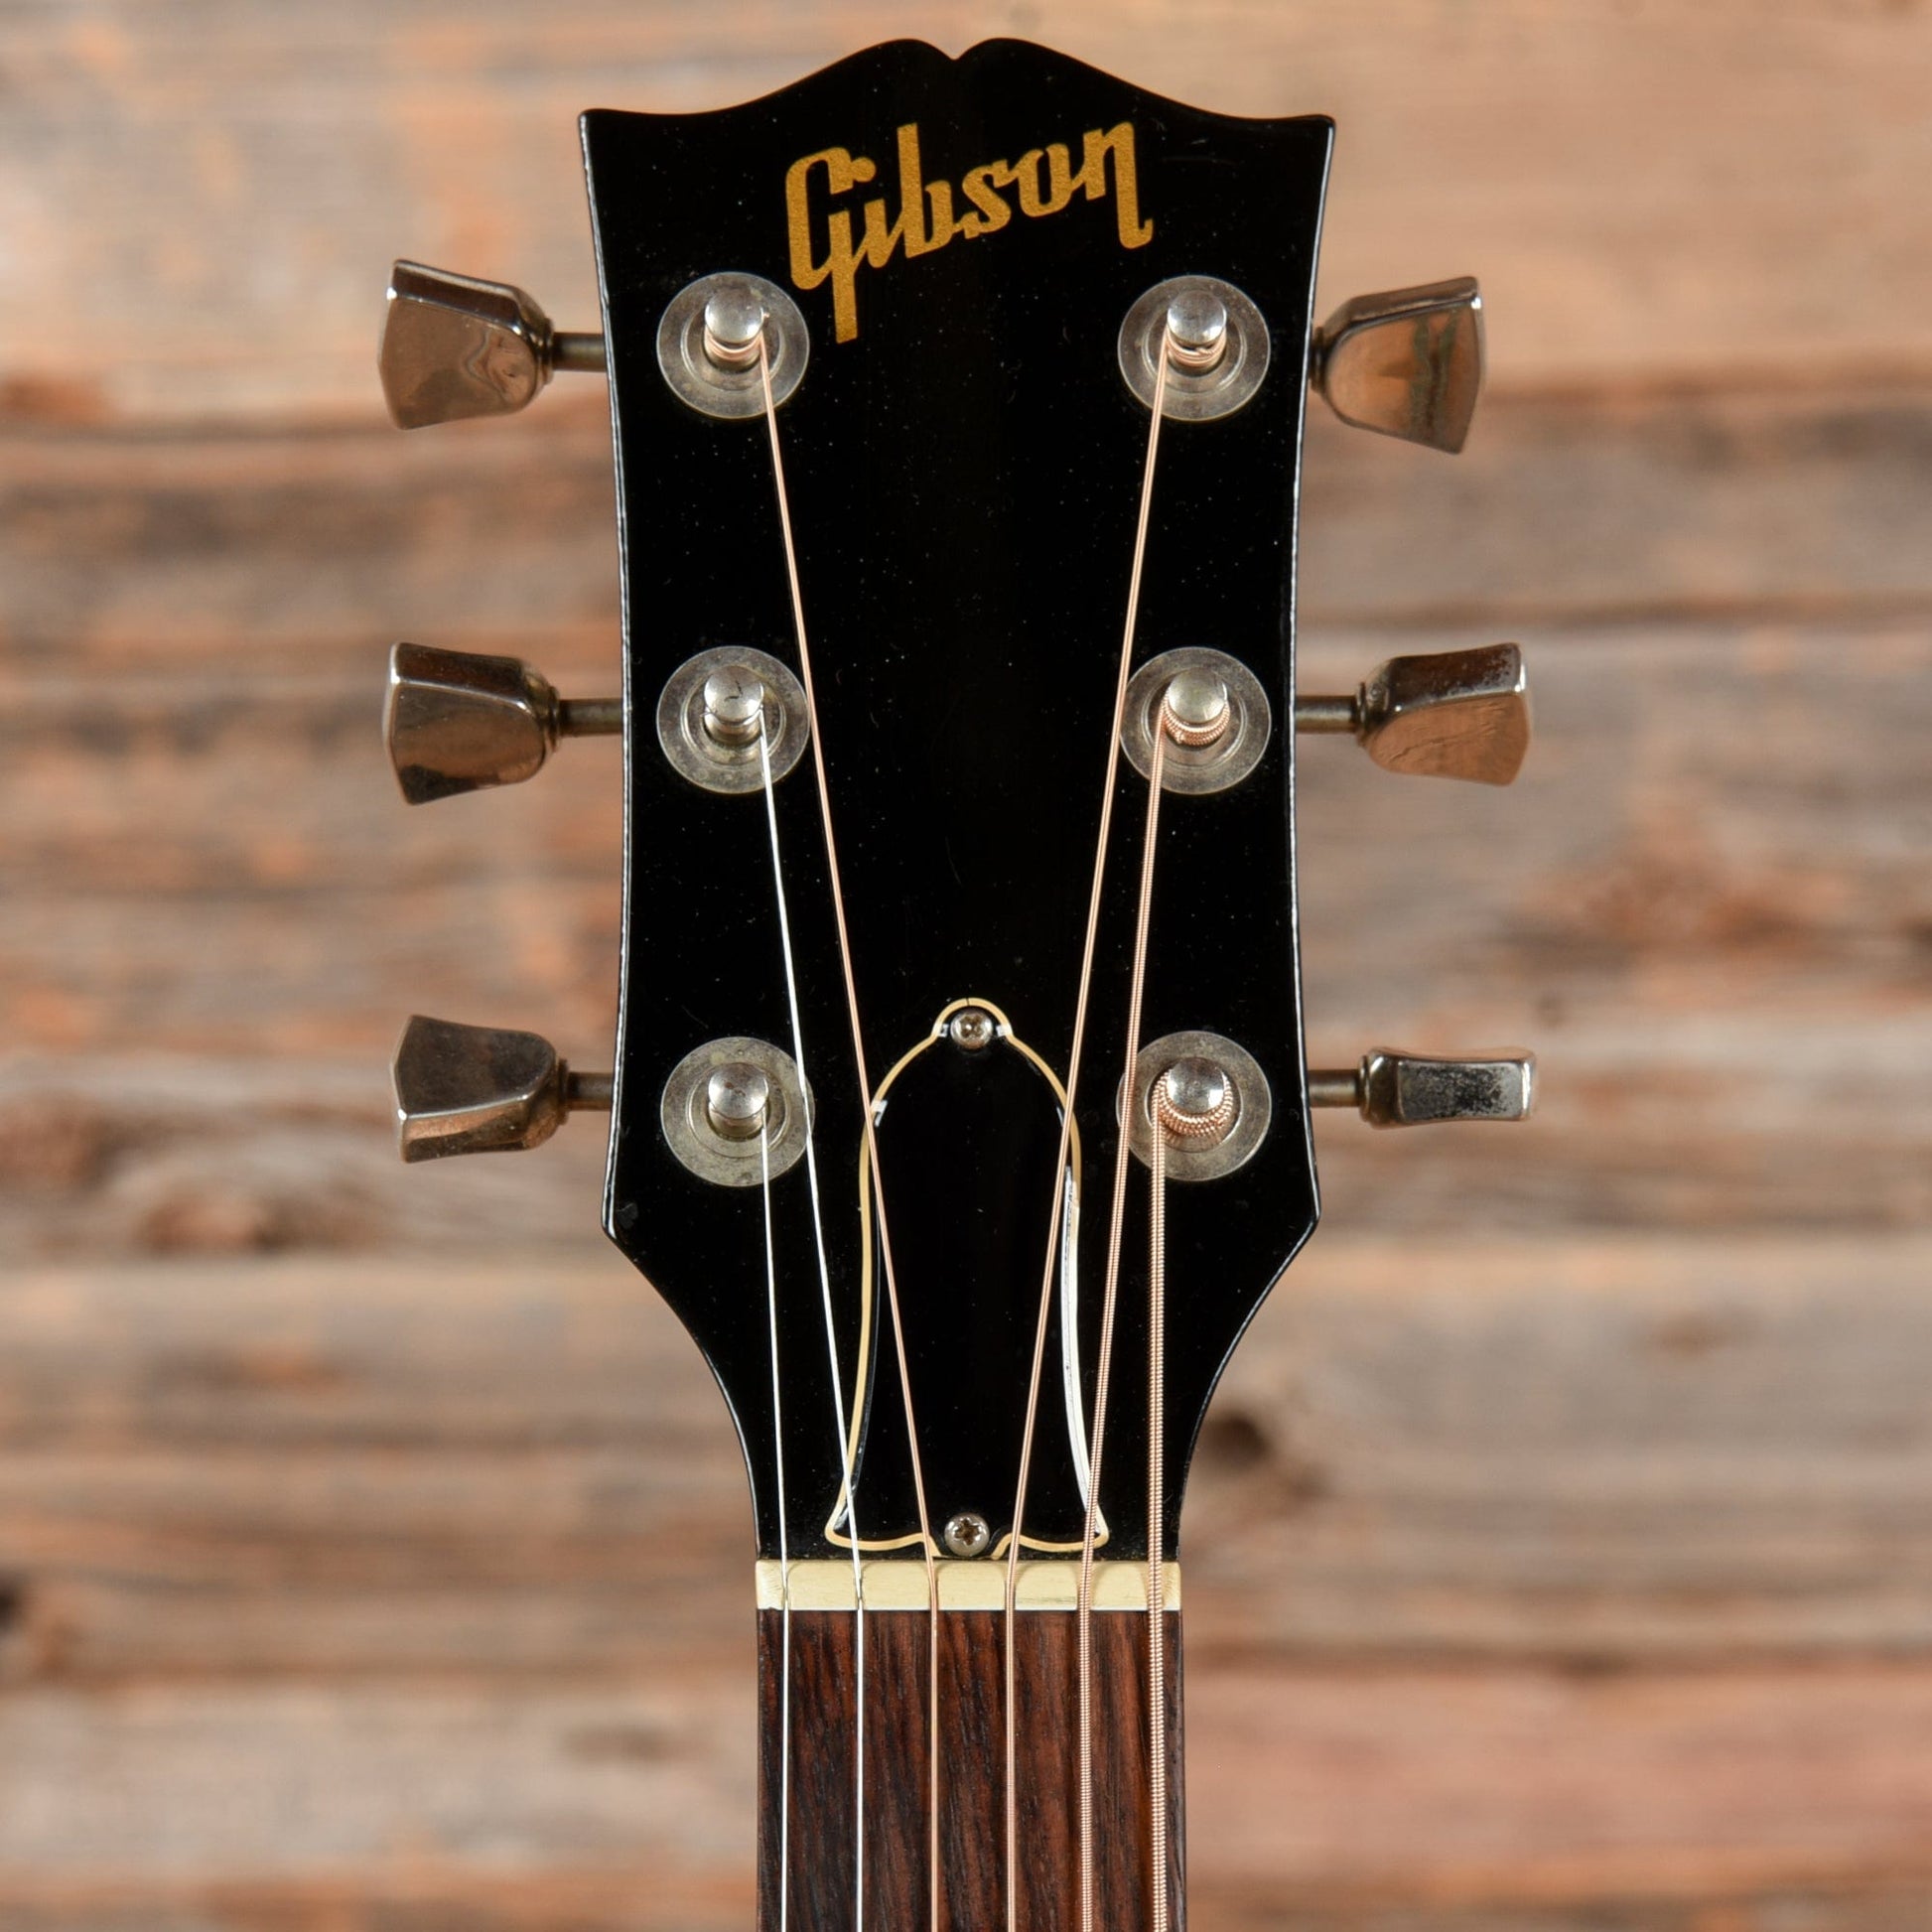 Gibson J-50 Deluxe Natural 1978 Acoustic Guitars / Dreadnought